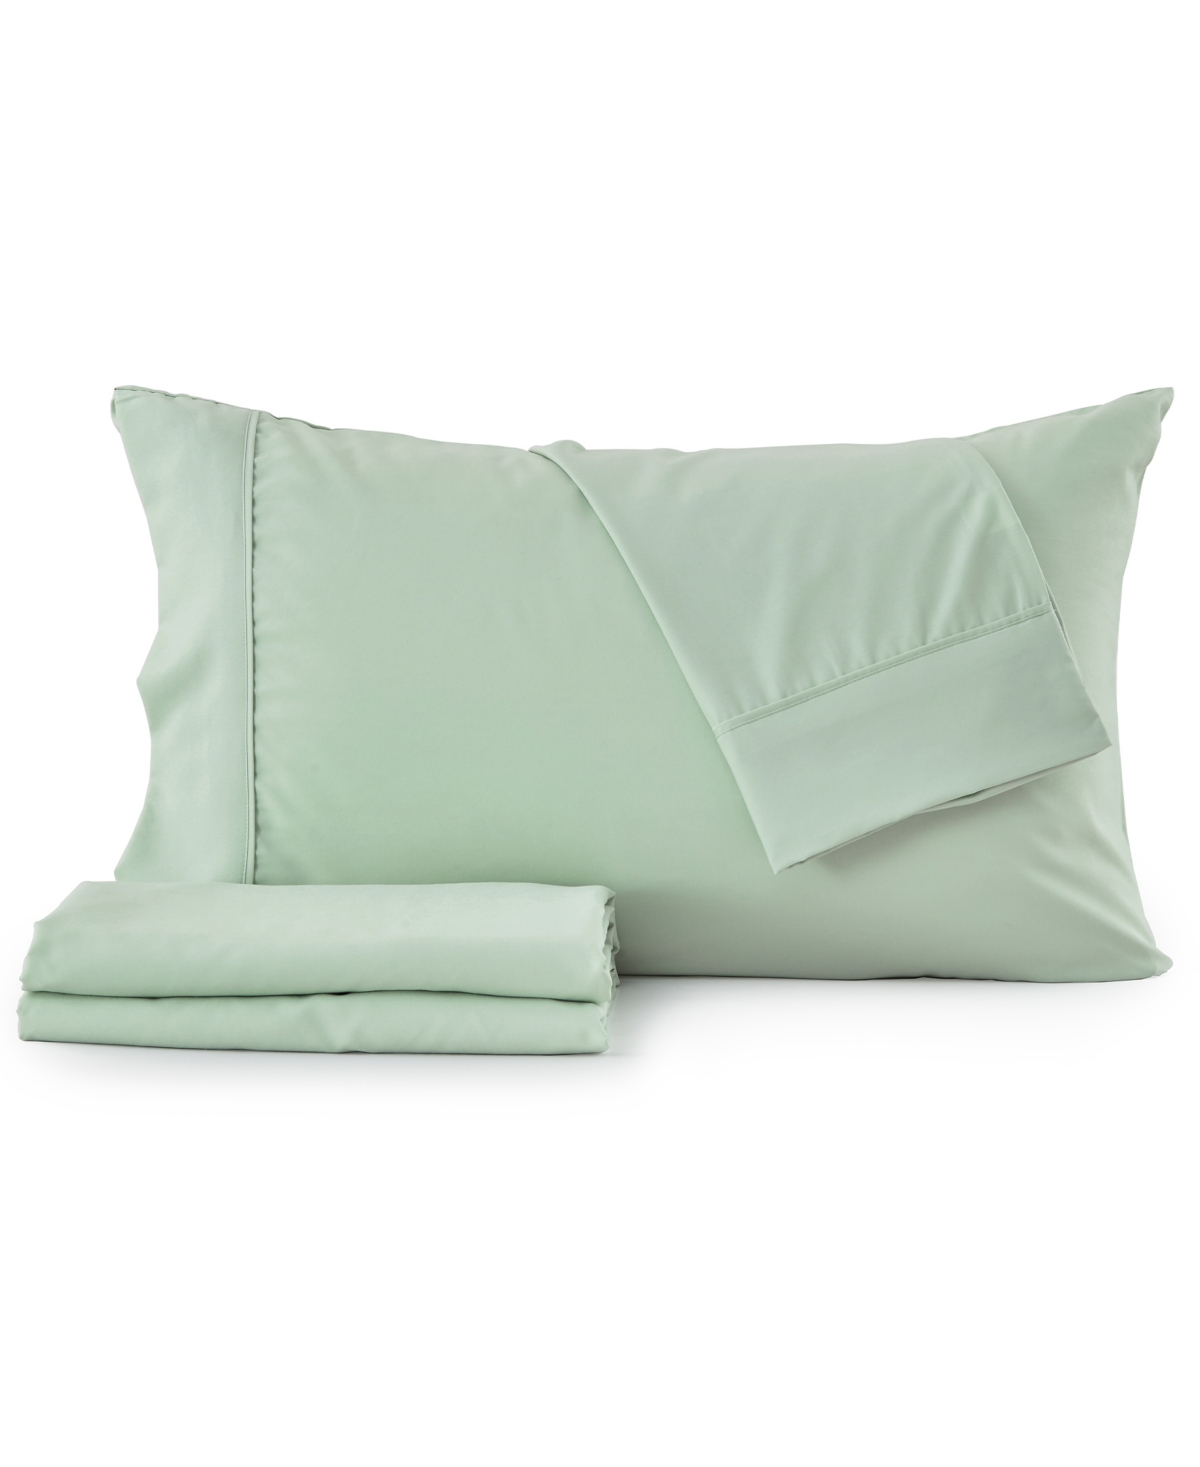 Premium Comforts Rayon From Bamboo Blend Crease-resistant 4 Piece Sheet Set, Queen In Sage